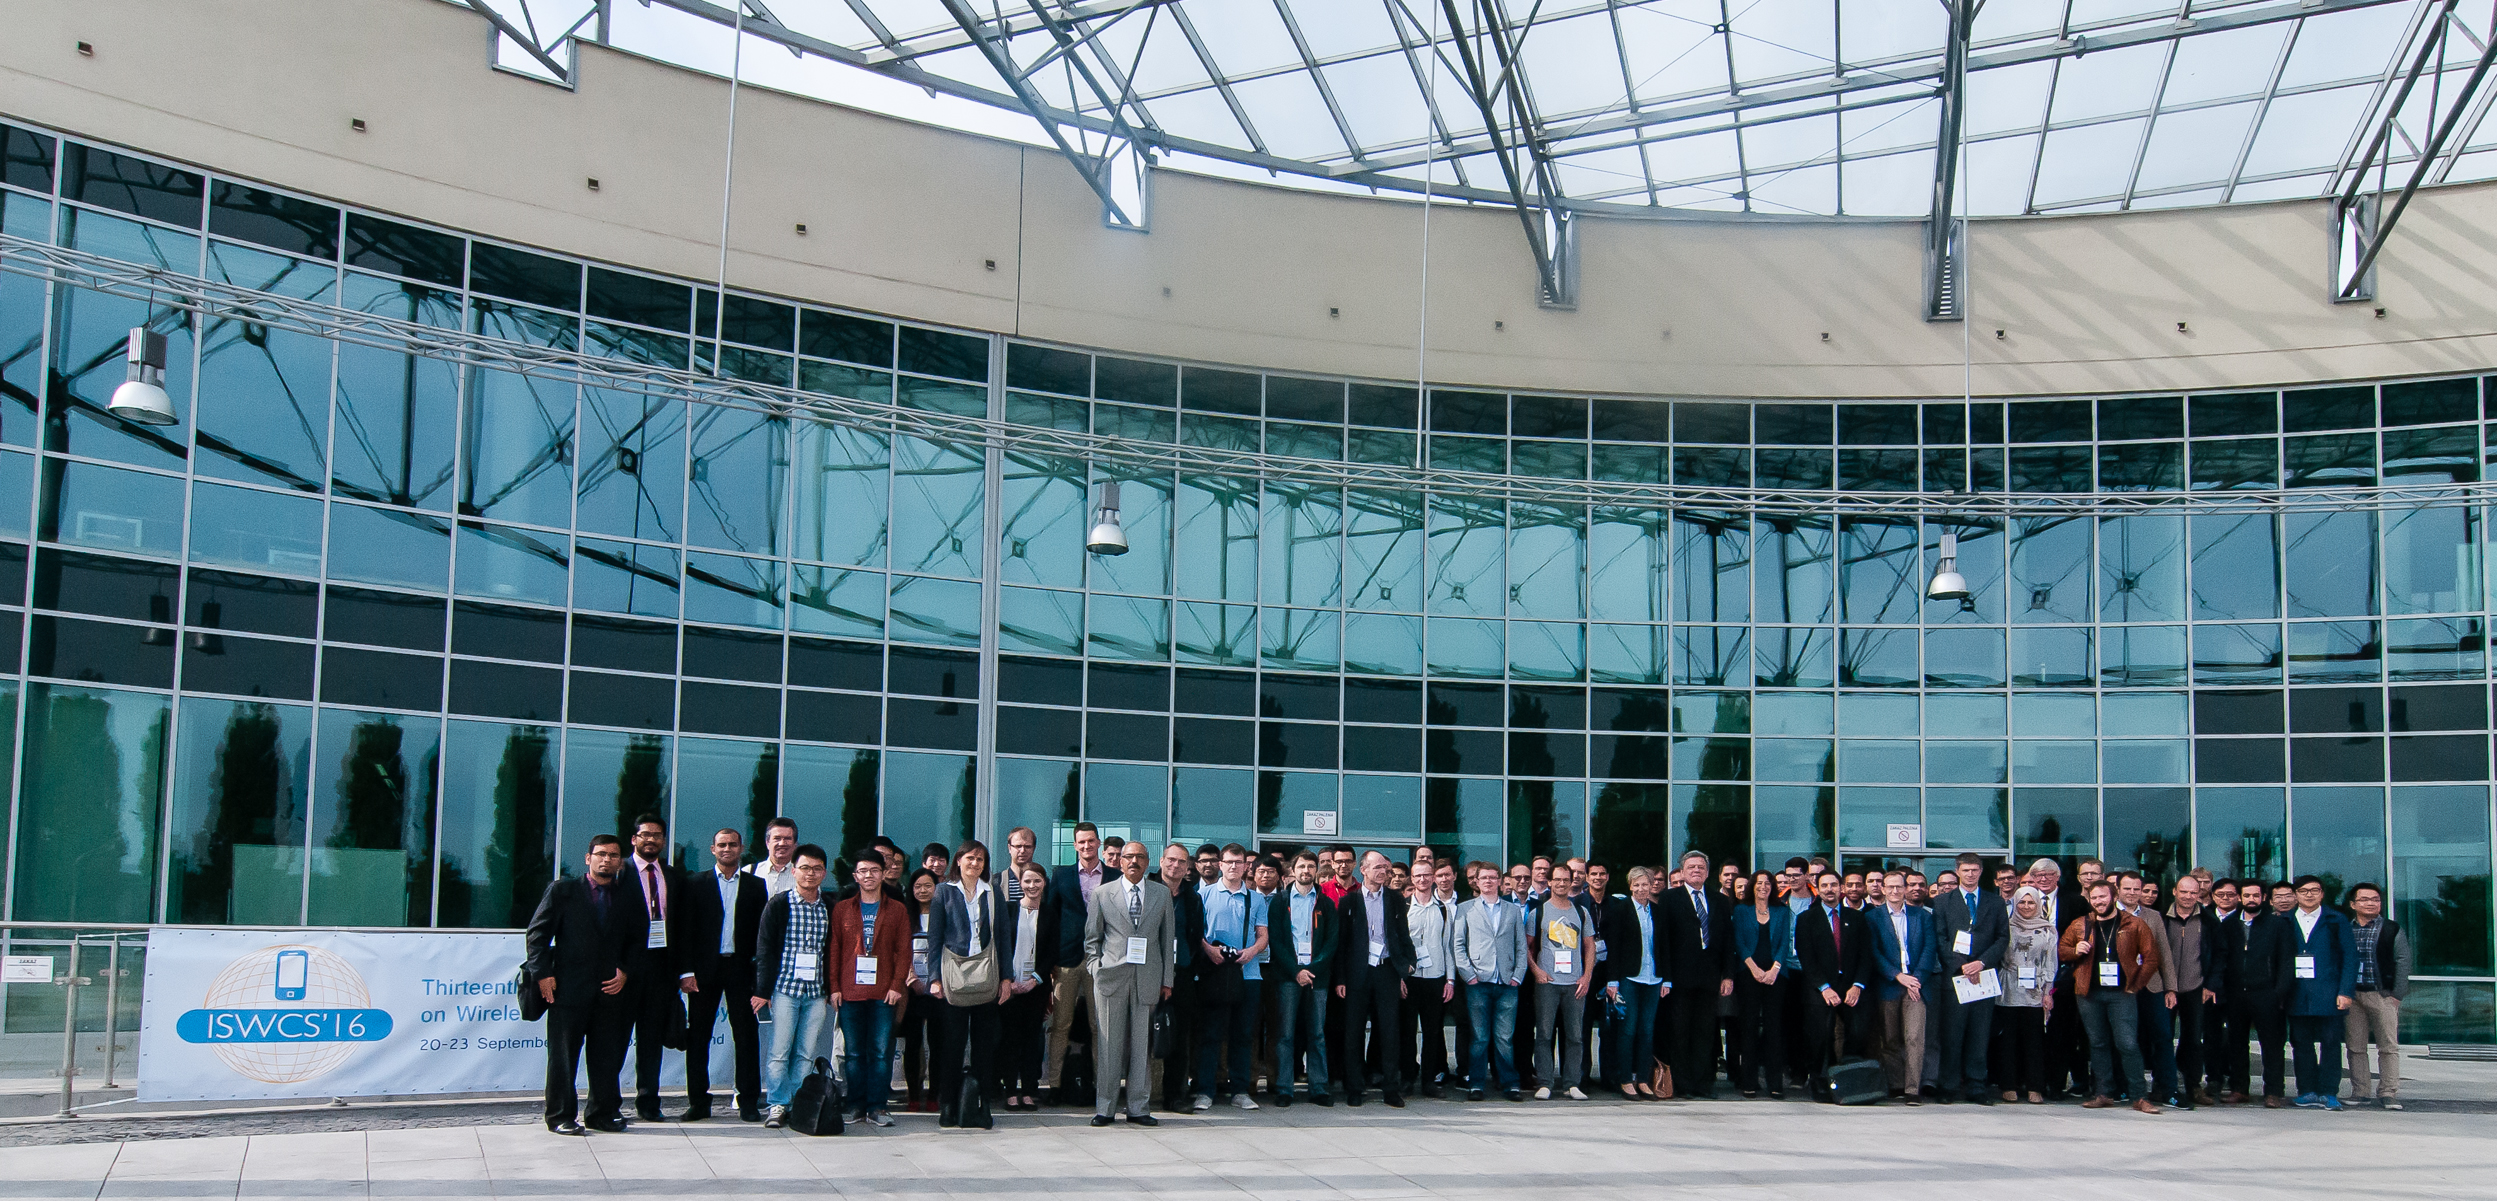 Participants of ISWCS 2016